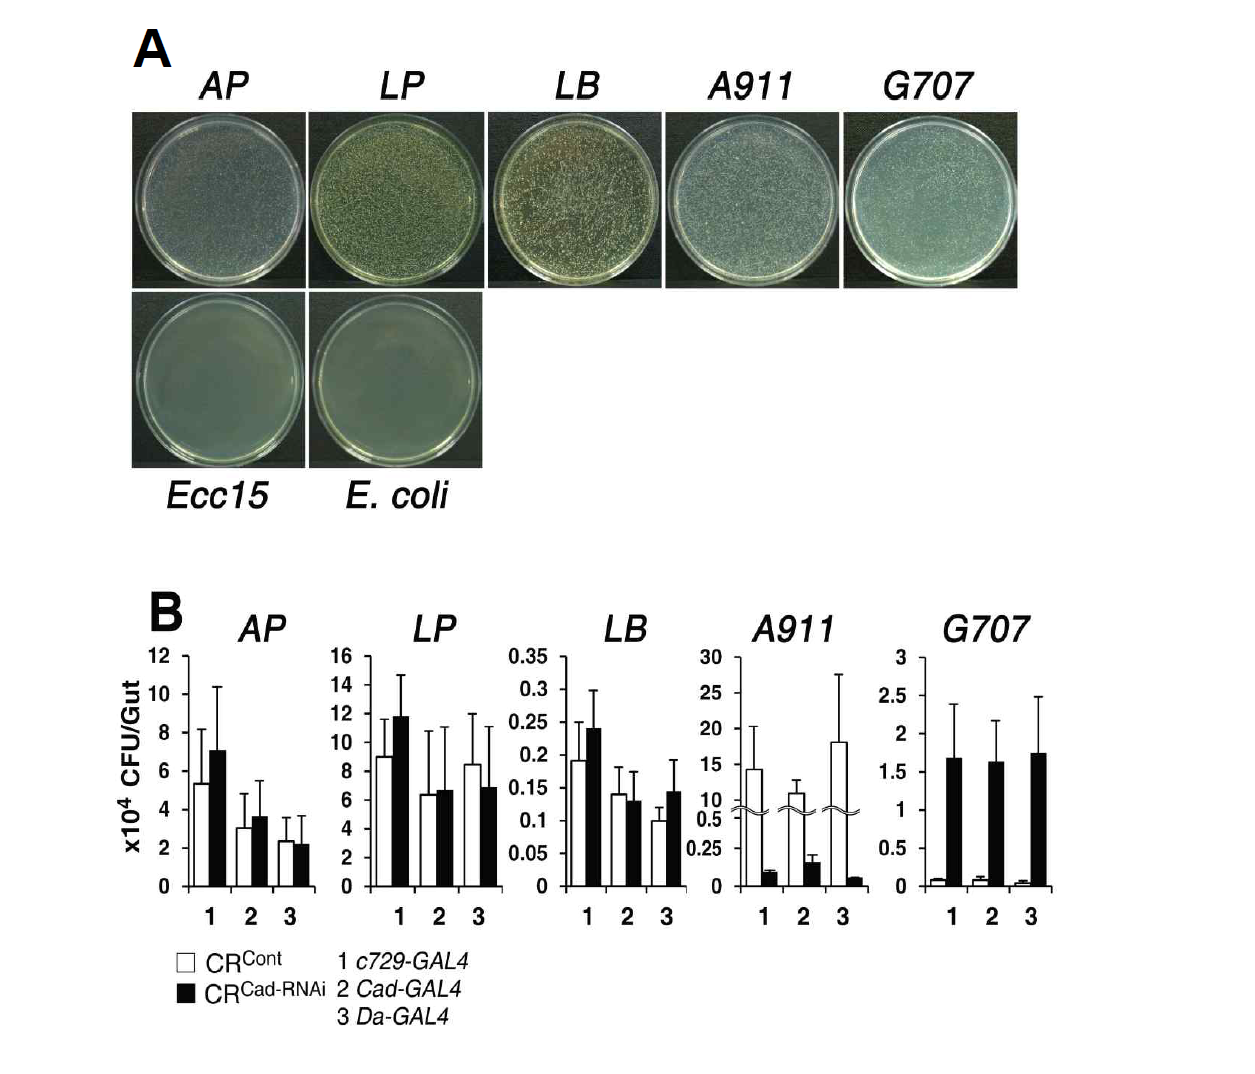 (A) Commensal microbes can persist in the gut. Colonization of GF animals with each of the isolated commensal microbes. Homogenates of dissected midguts (8-day-old adult flies) were plated. LP, LB, AP, G707, A911. Ecc15 and E. coli were also used as noncommensal microbes. (B) Real-time PCR-based analysis to quantify the number of each commensal microbe in the posterior midguts